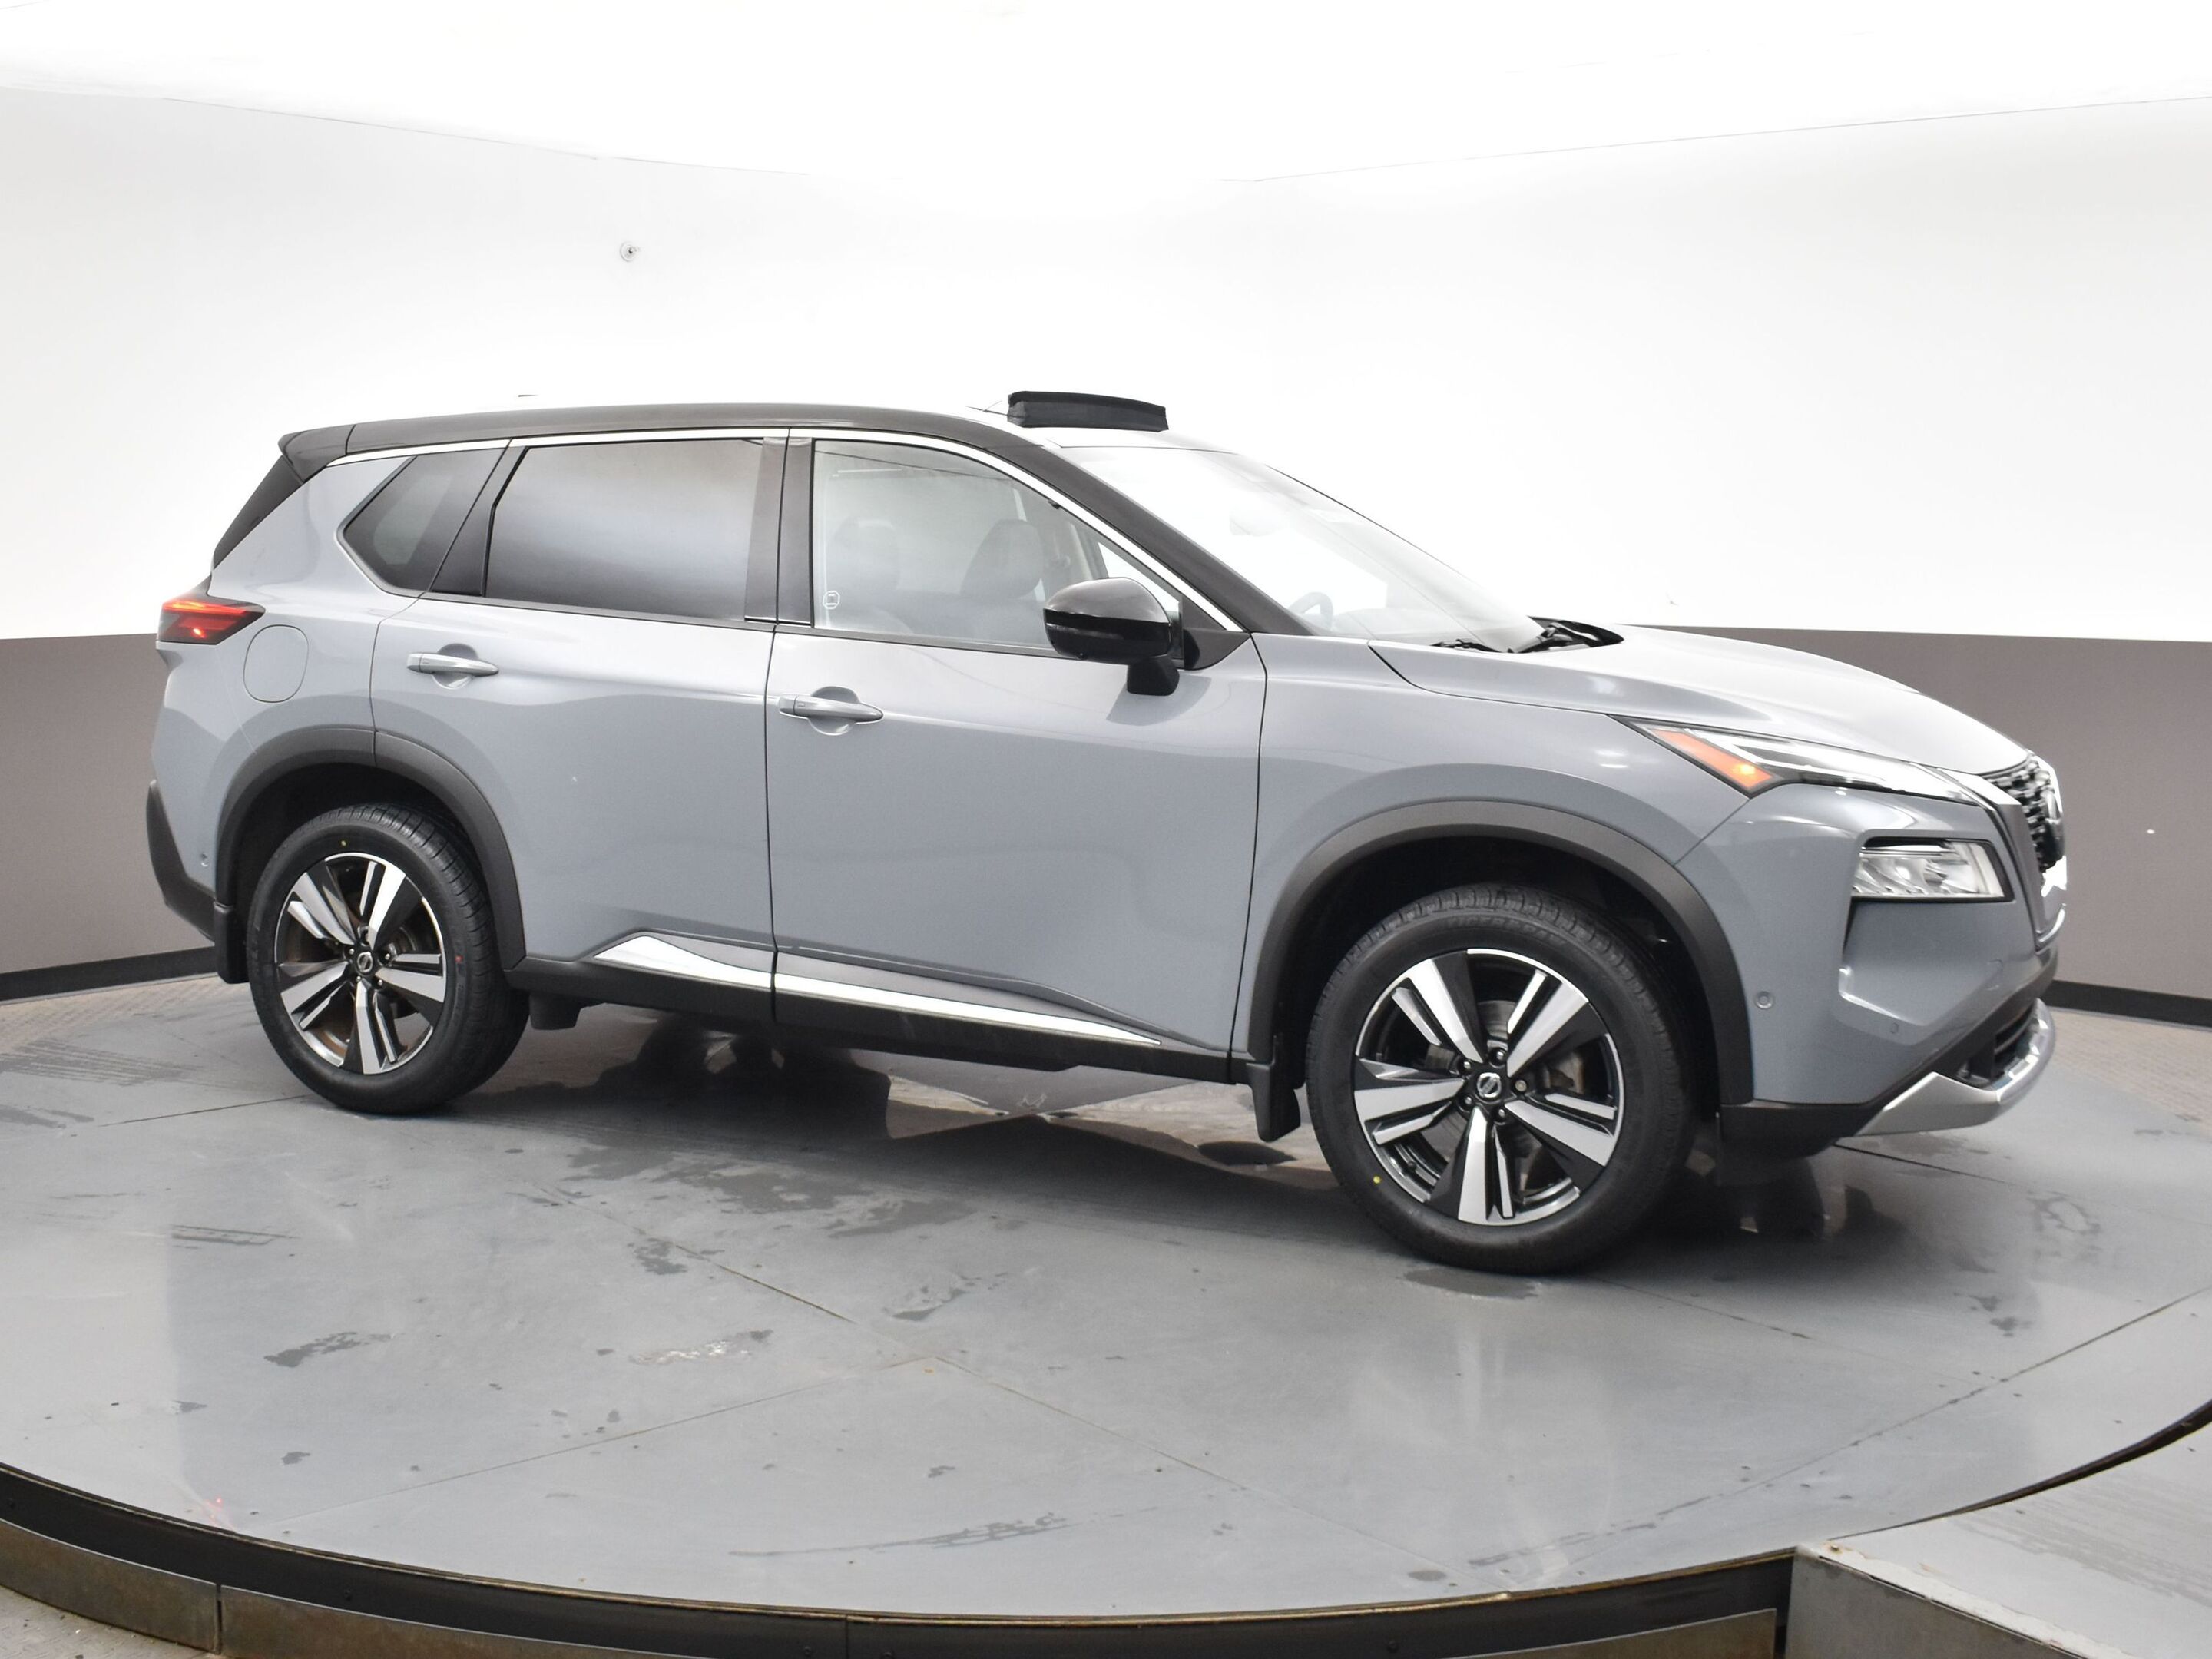 2021 Nissan Rogue PLATINUM- AWD - Call 902-469-8484 To Book Appointm